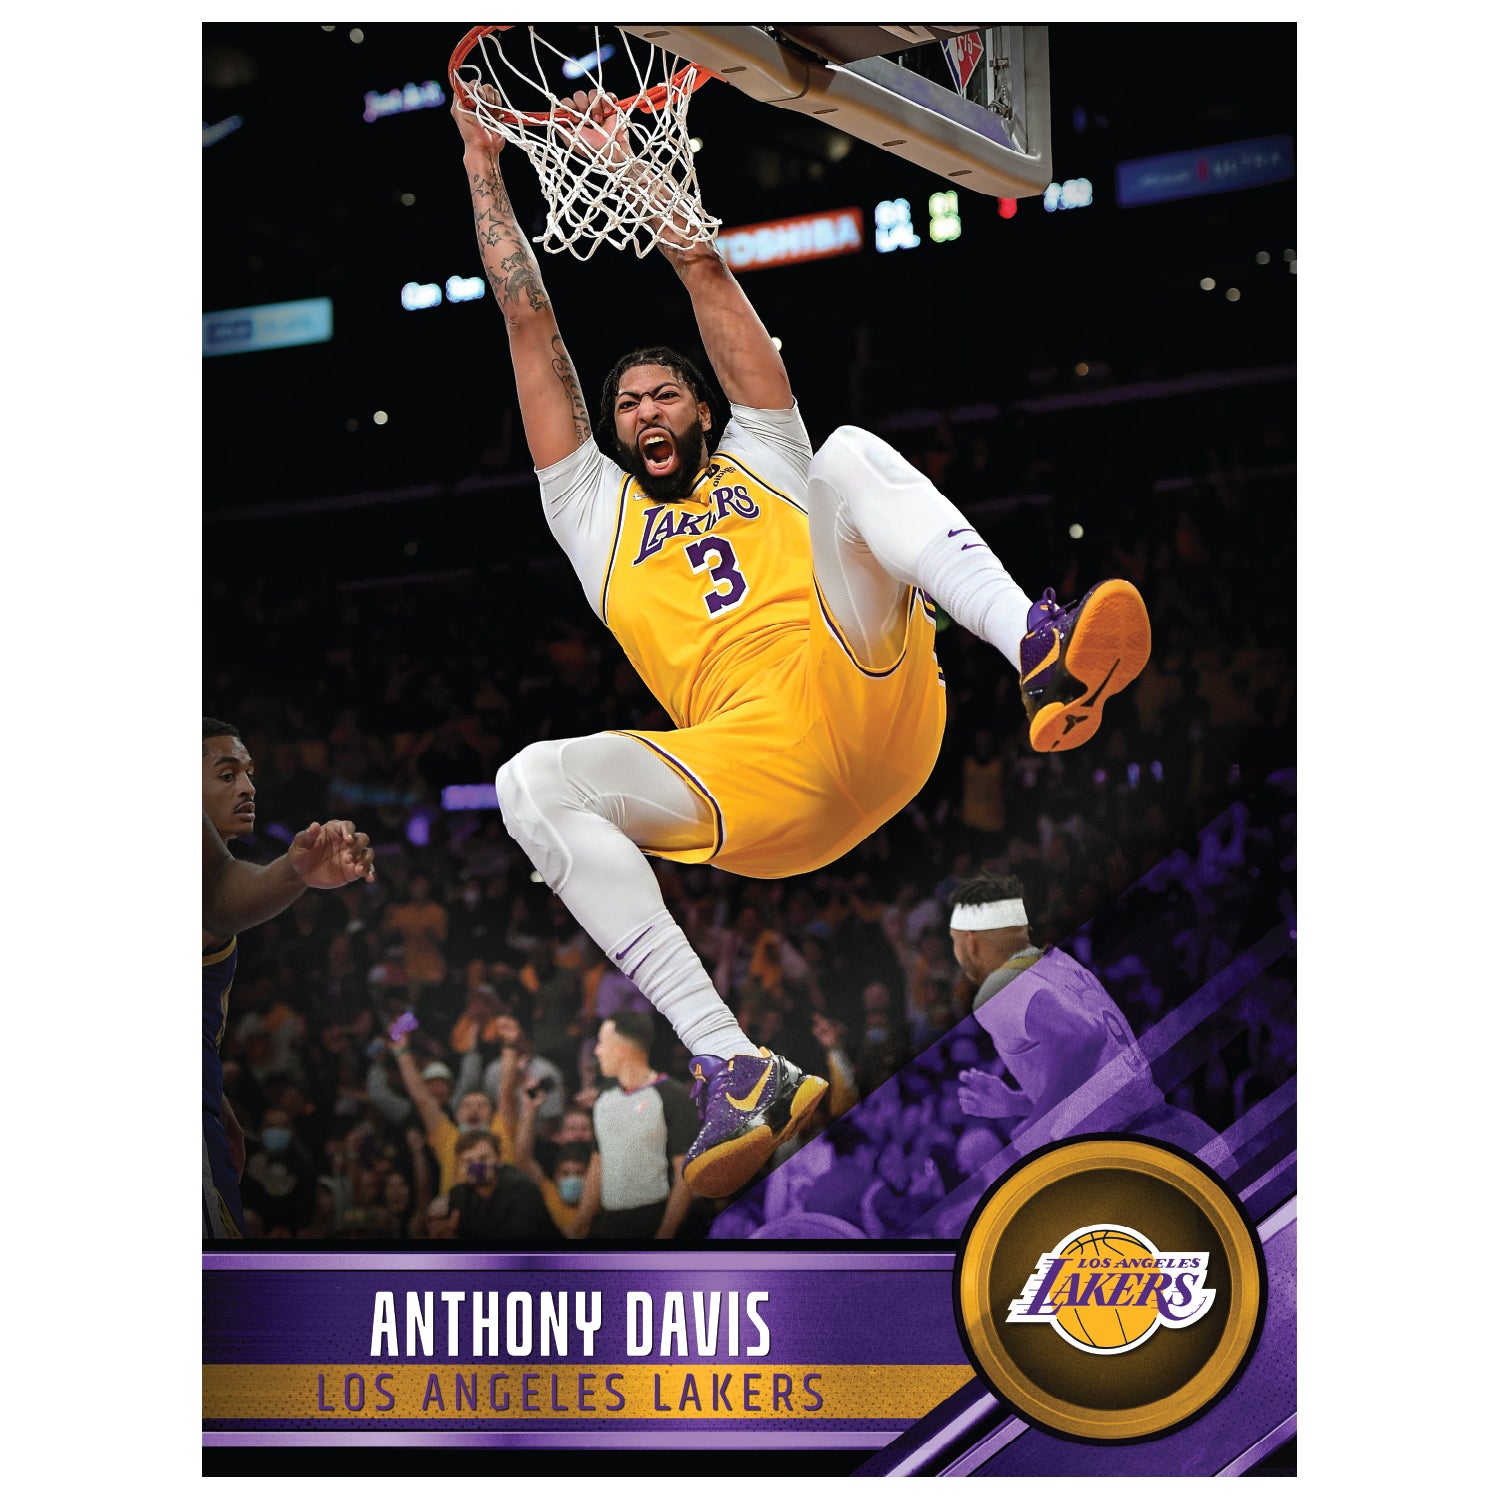 Los Angeles Lakers: Anthony Davis 2021 Poster - Officially